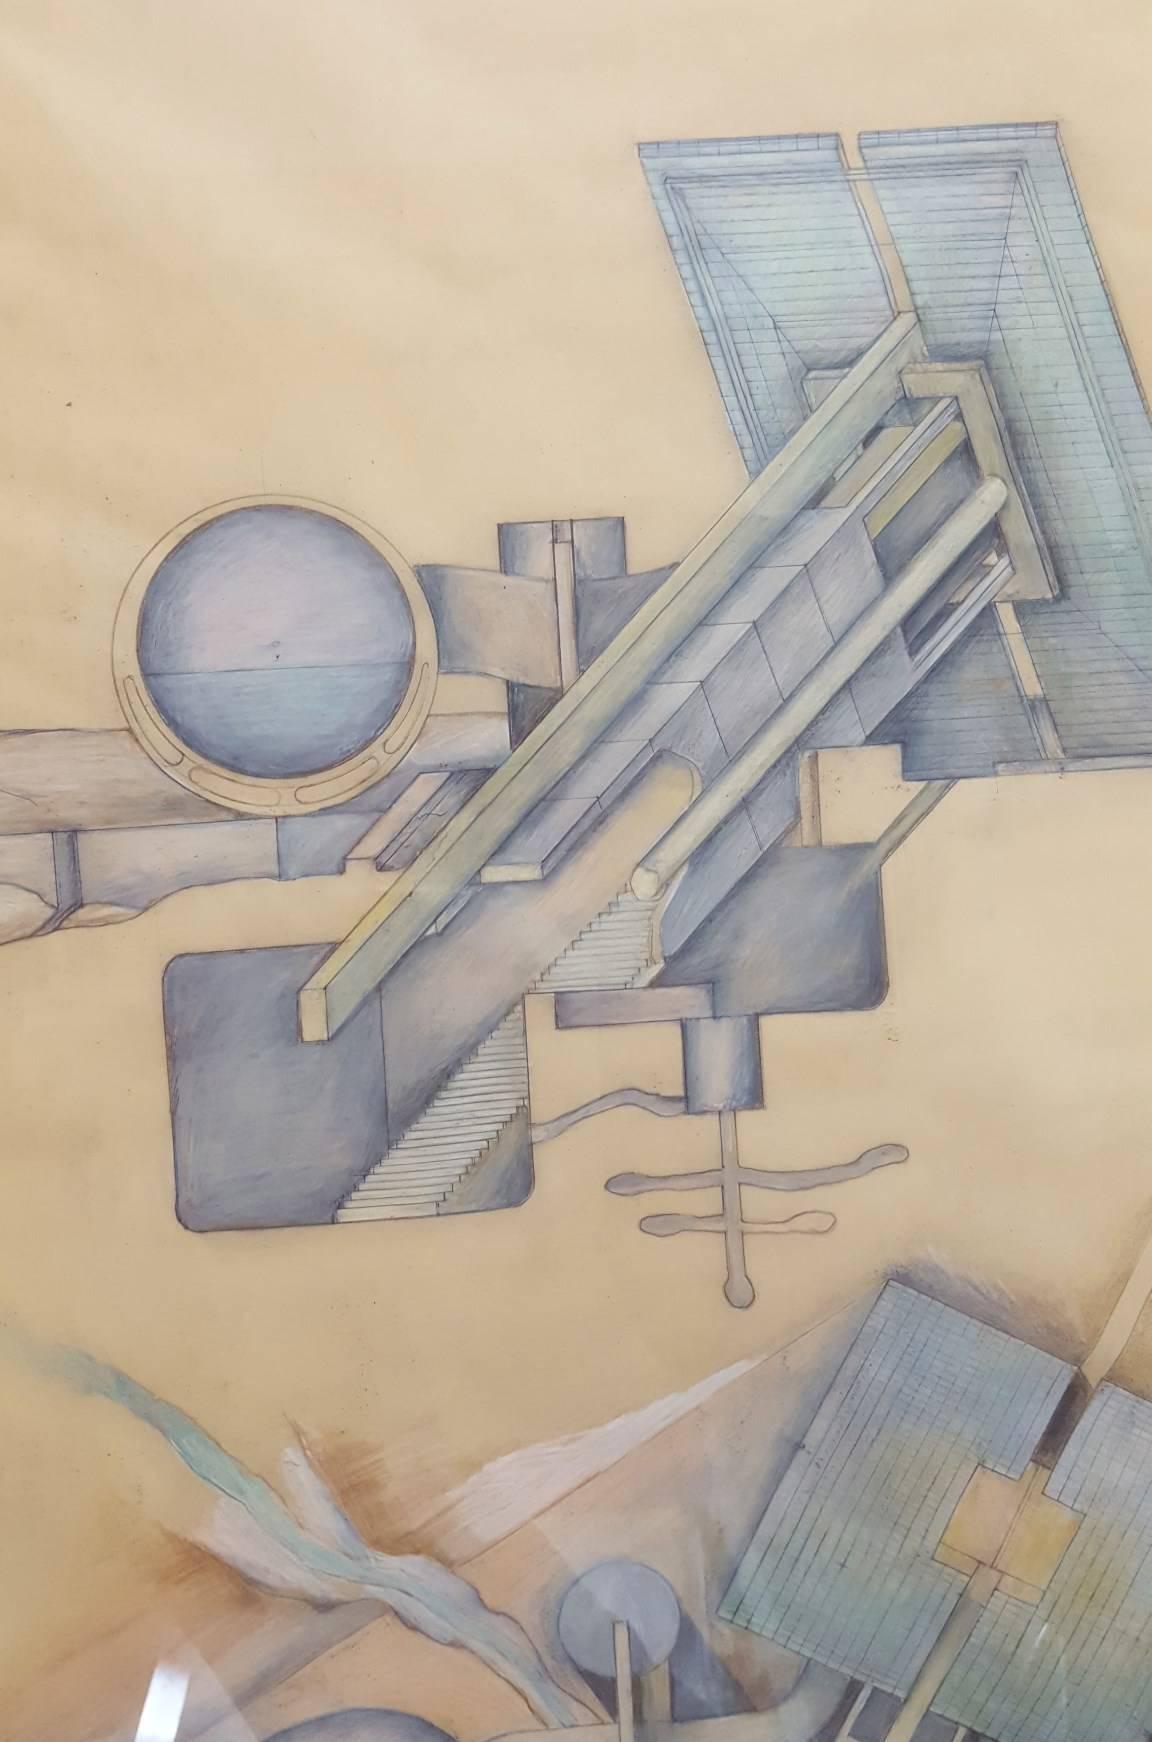 An original signed mixed media - drawing, watercolor with colored pencils on paper by Austrian artist and architect Raimund Abraham (1933-2010) titled 